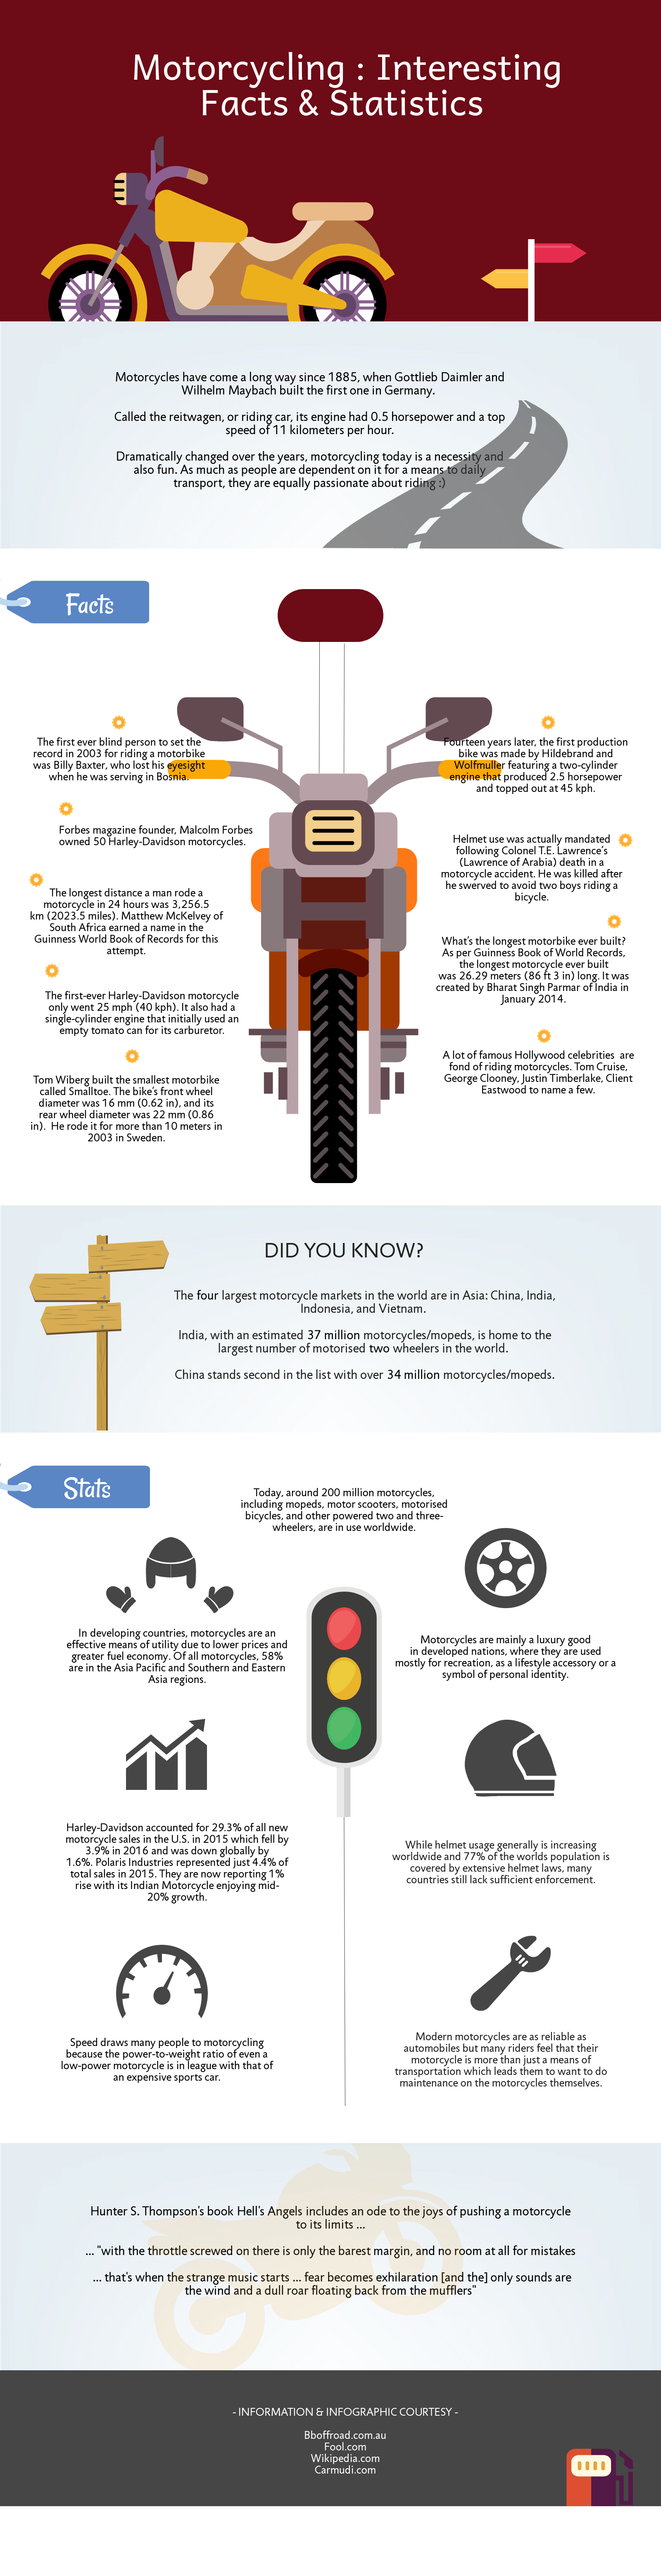 Motorcycling Facts & Statistics